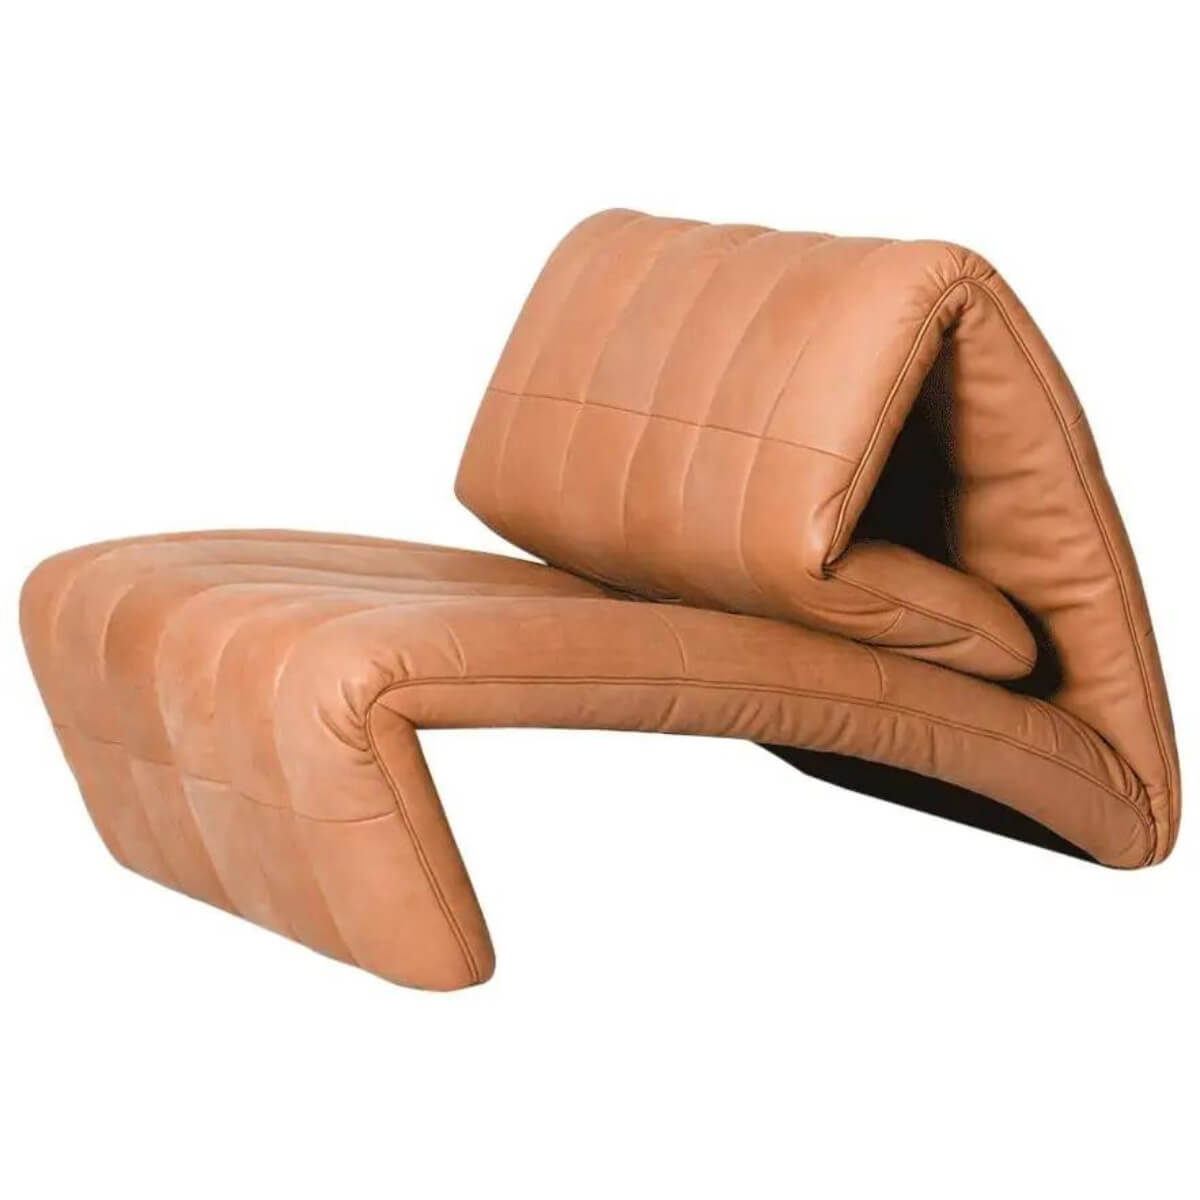 desede-leather-arm-chair-in-Australia-1